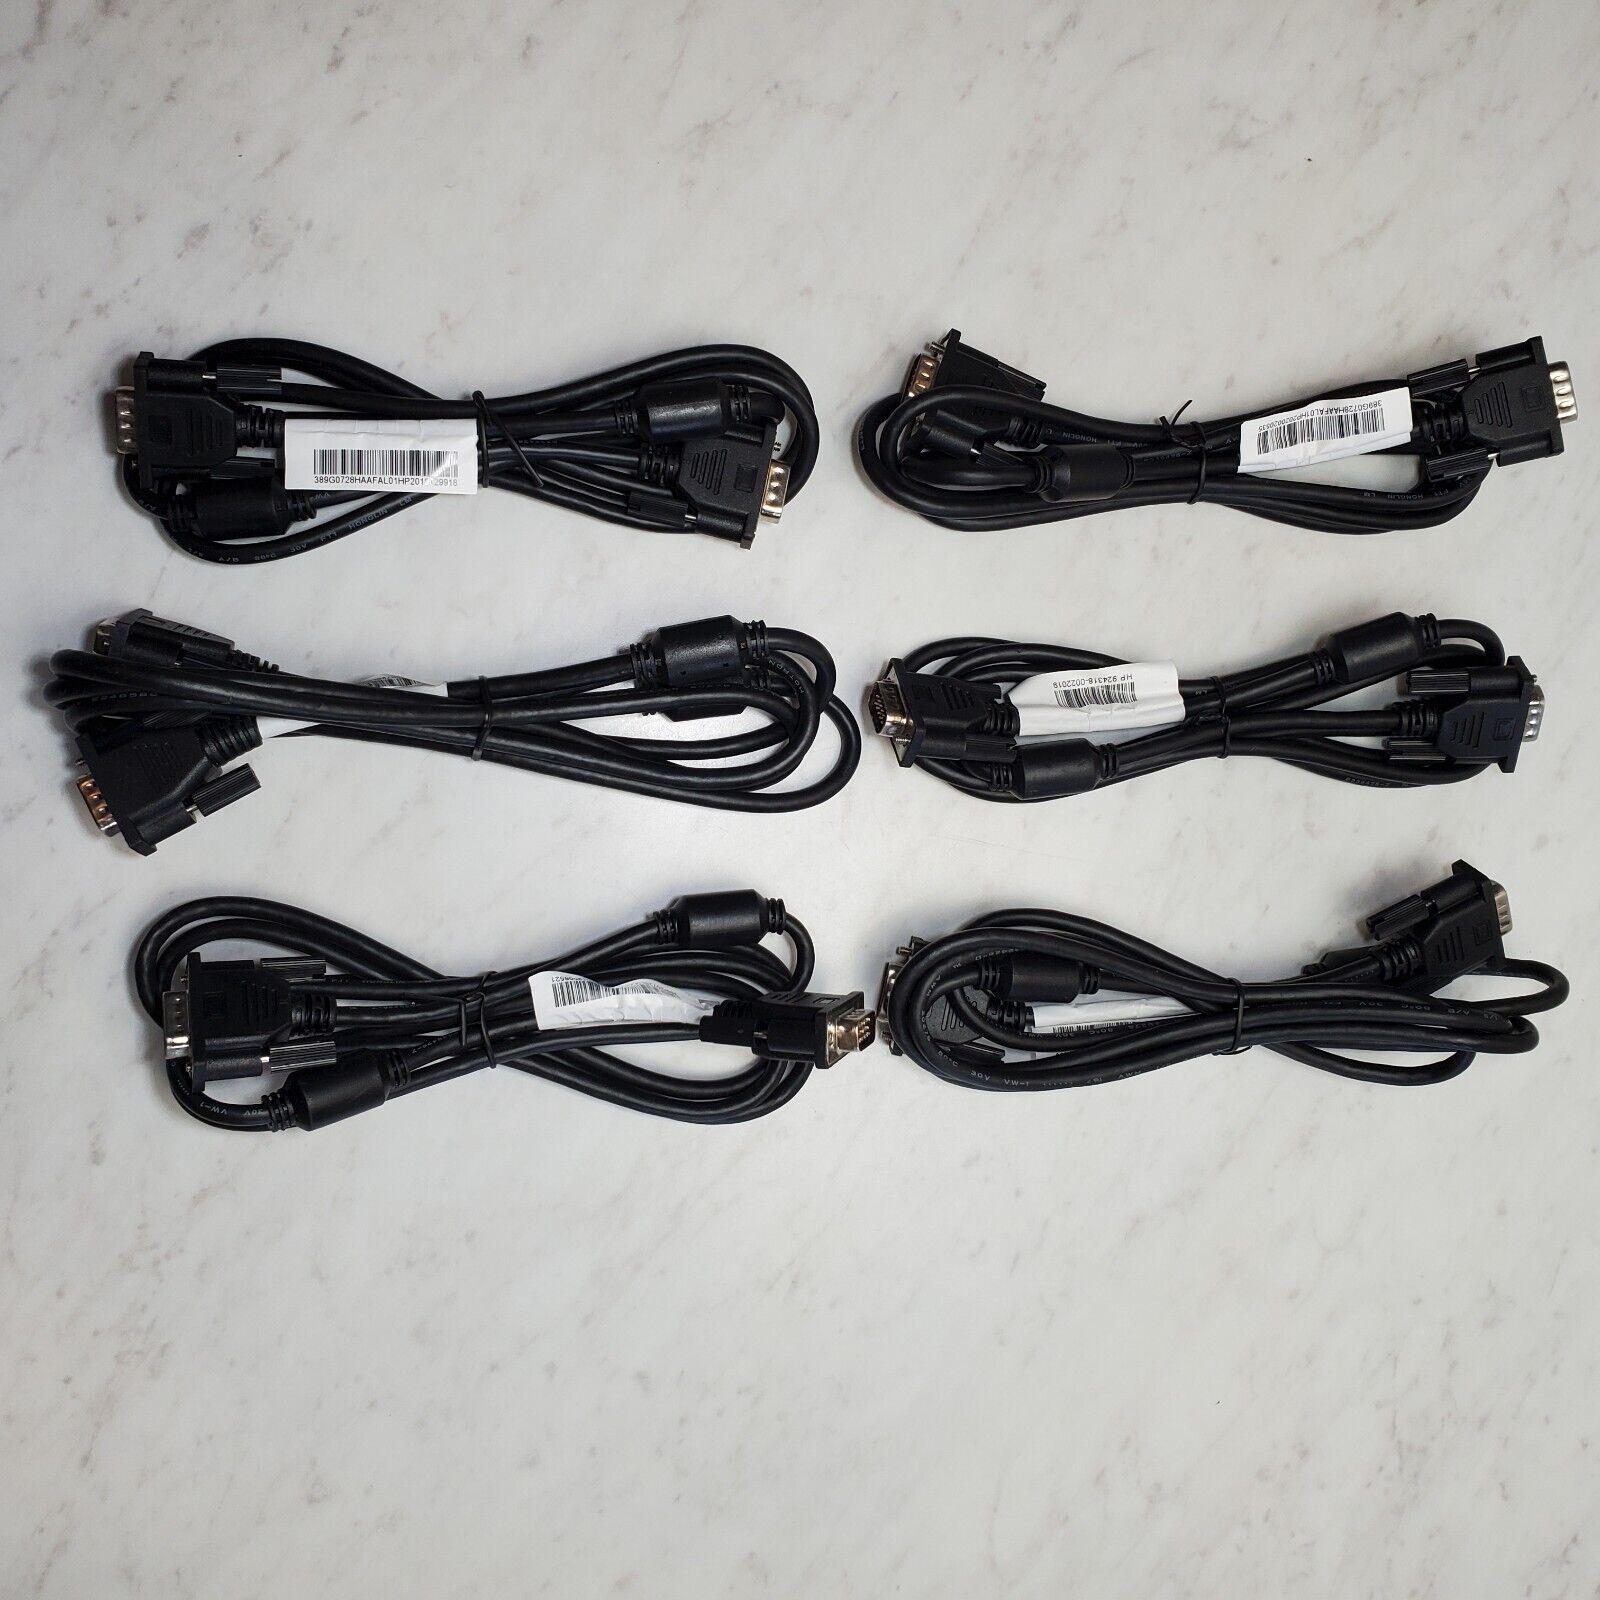 Lot of 6 Genuine HP 924318 Male To Male C2G VGA D-SUB Monitor Cable 15 P 5\' New